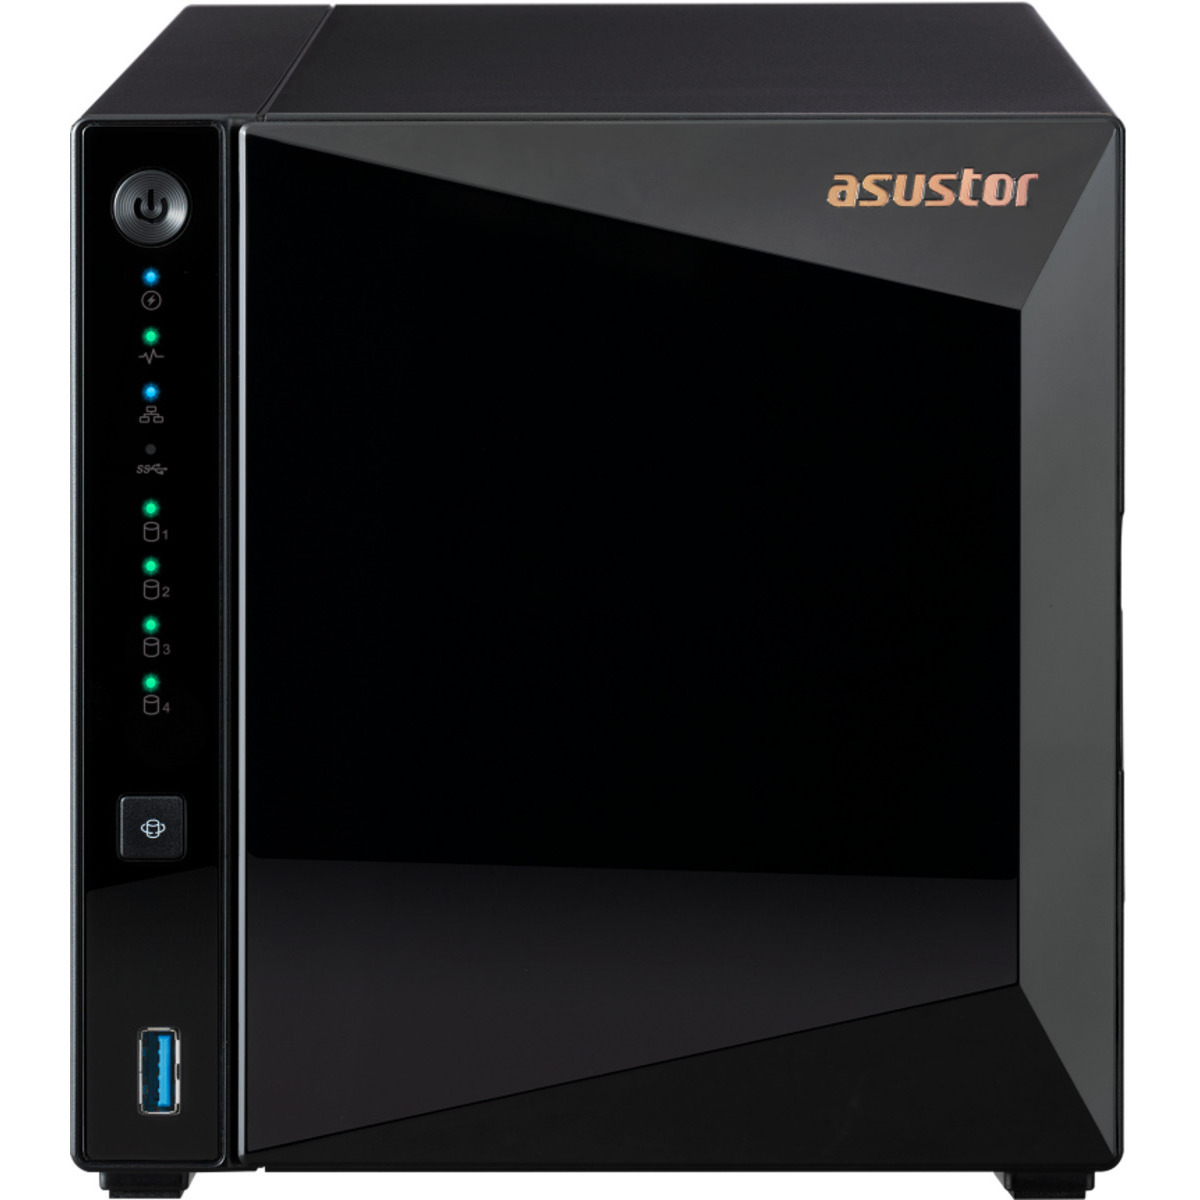 ASUSTOR DRIVESTOR 4 Pro Gen2 AS3304T v2 72tb 4-Bay Desktop Personal / Basic Home / Small Office NAS - Network Attached Storage Device 4x18tb Seagate EXOS X18 ST18000NM000J 3.5 7200rpm SATA 6Gb/s HDD ENTERPRISE Class Drives Installed - Burn-In Tested - ON SALE DRIVESTOR 4 Pro Gen2 AS3304T v2